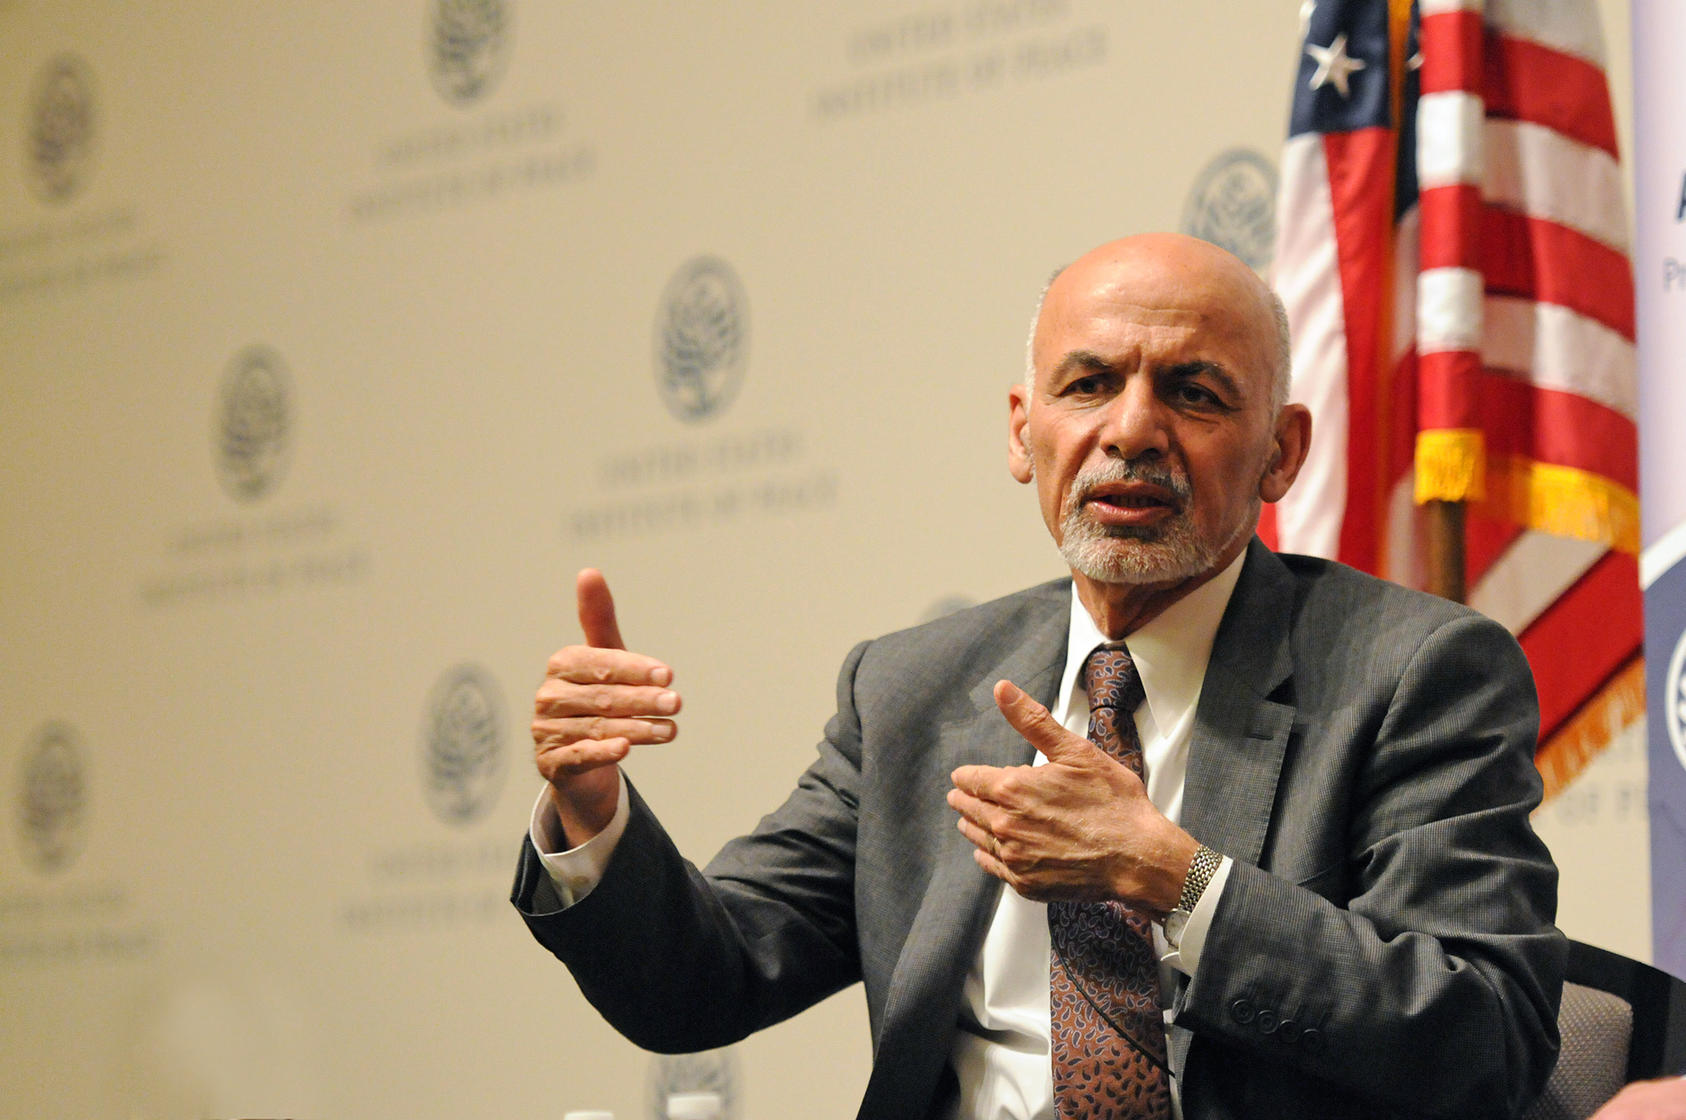 Afghan President Ashraf Ghani, shown speaking at USIP in 2015, announced new Taliban prisoner releases and laid out his vision for Afghanistan’s peace process. He spoke in an online discussion from Kabul that was broadcast nationally in Afghanistan.